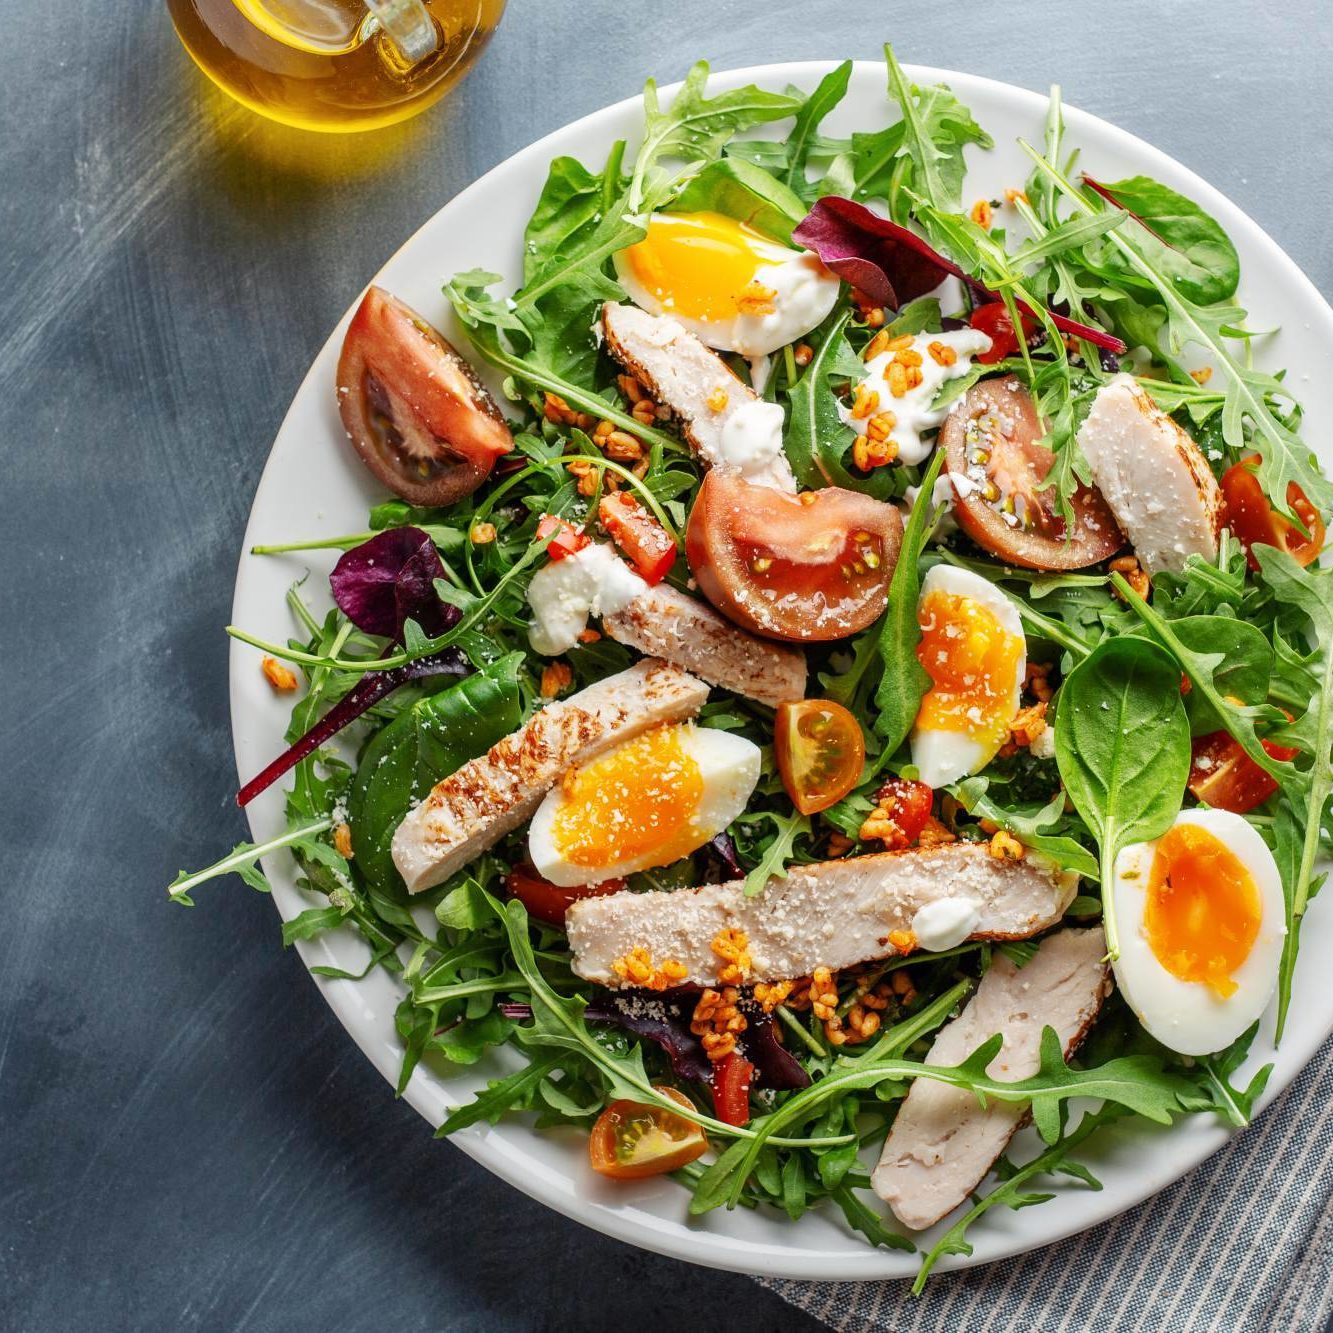 Tasty appetizing salad with turkey, eggs, bulgur and vegetables served on plate. Closeup.